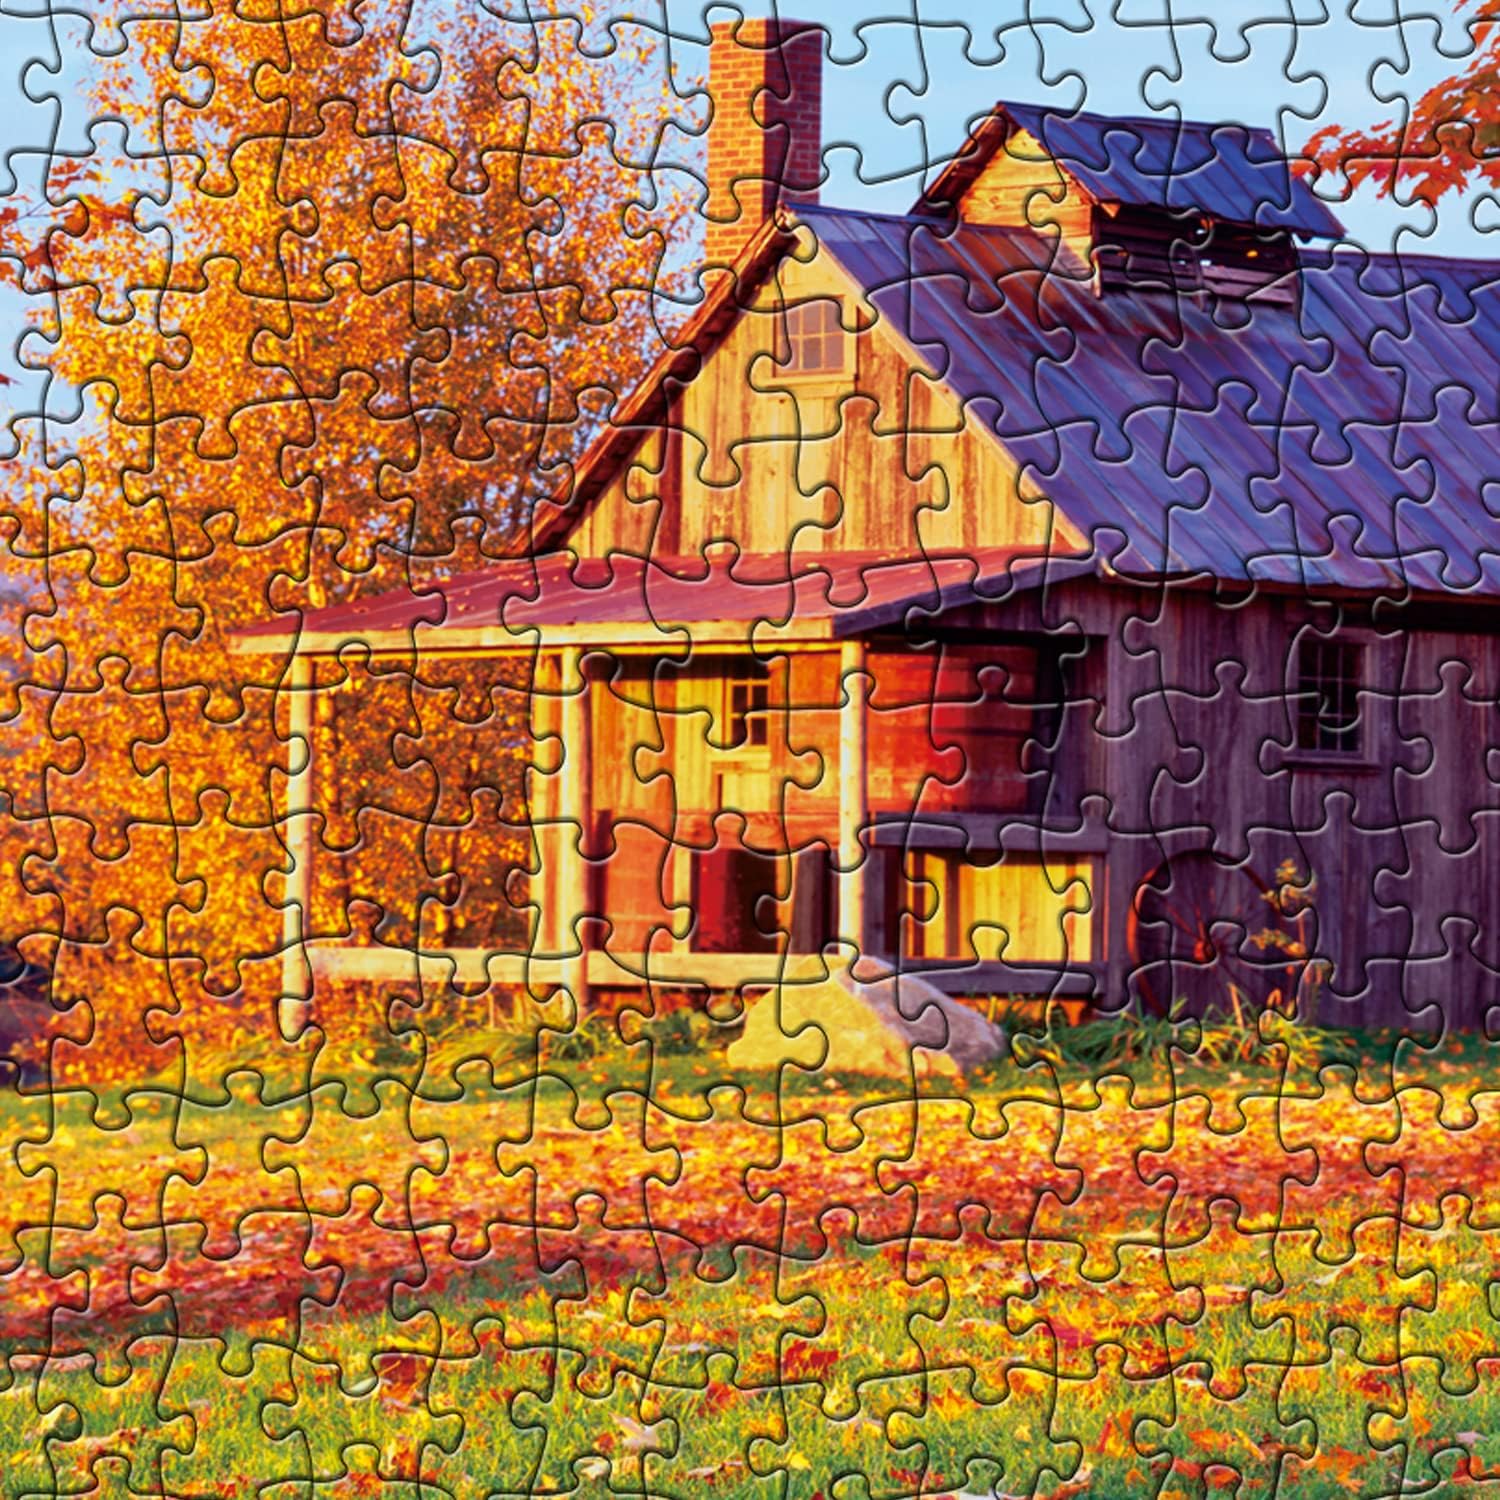 Pickforu® Country Cottage Jigsaw Puzzles 1000 pièces